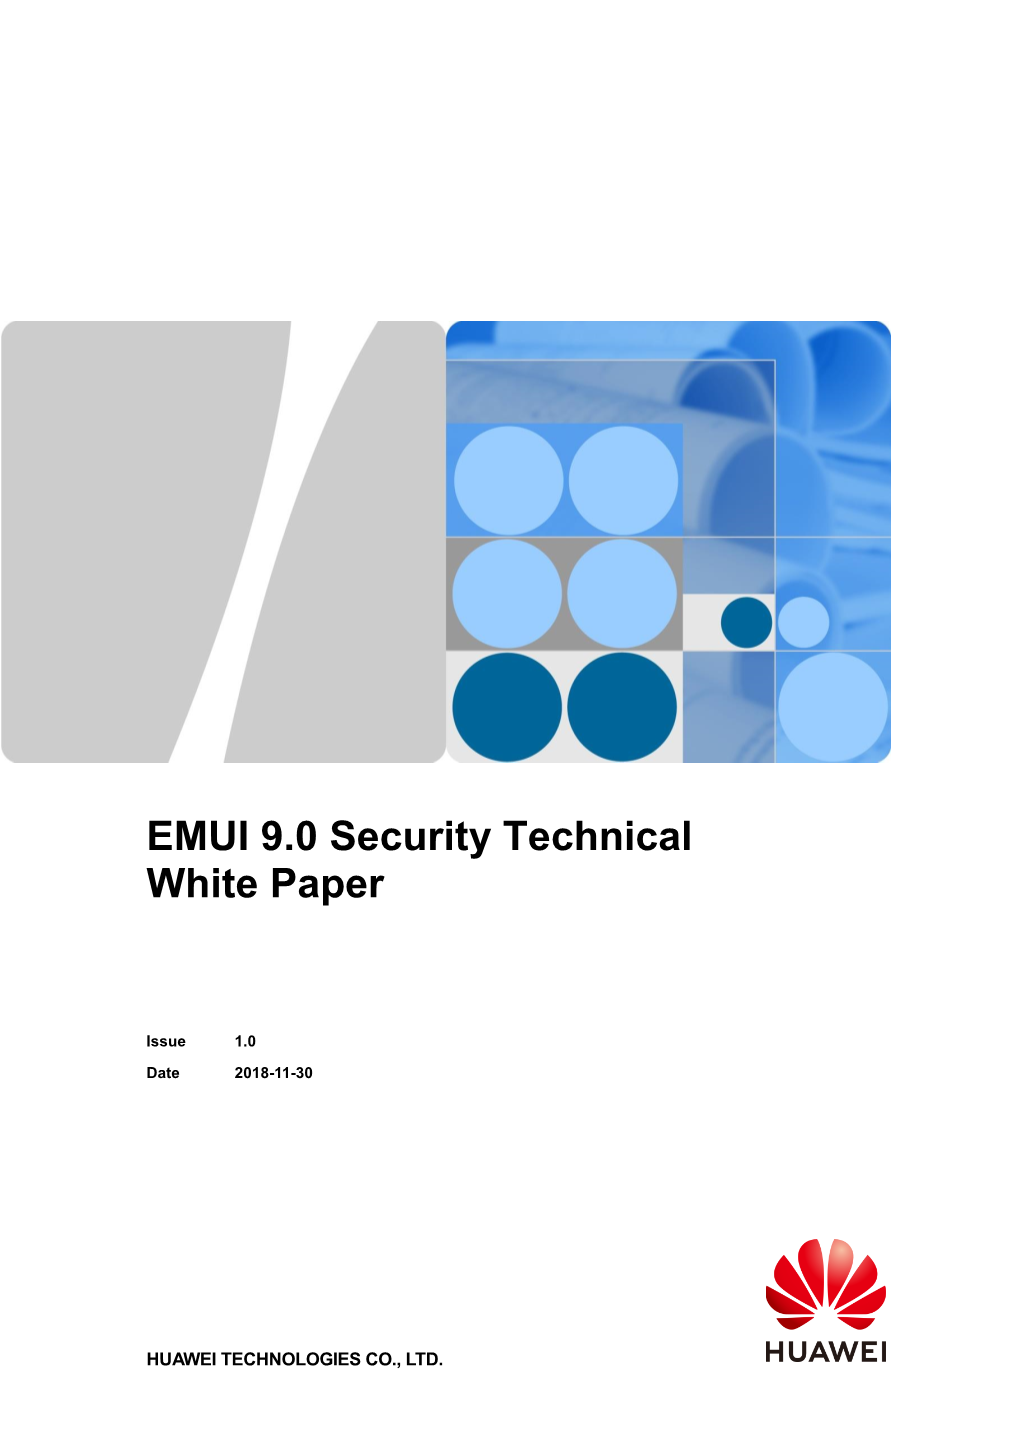 EMUI 9.0 Security Technical White Paper